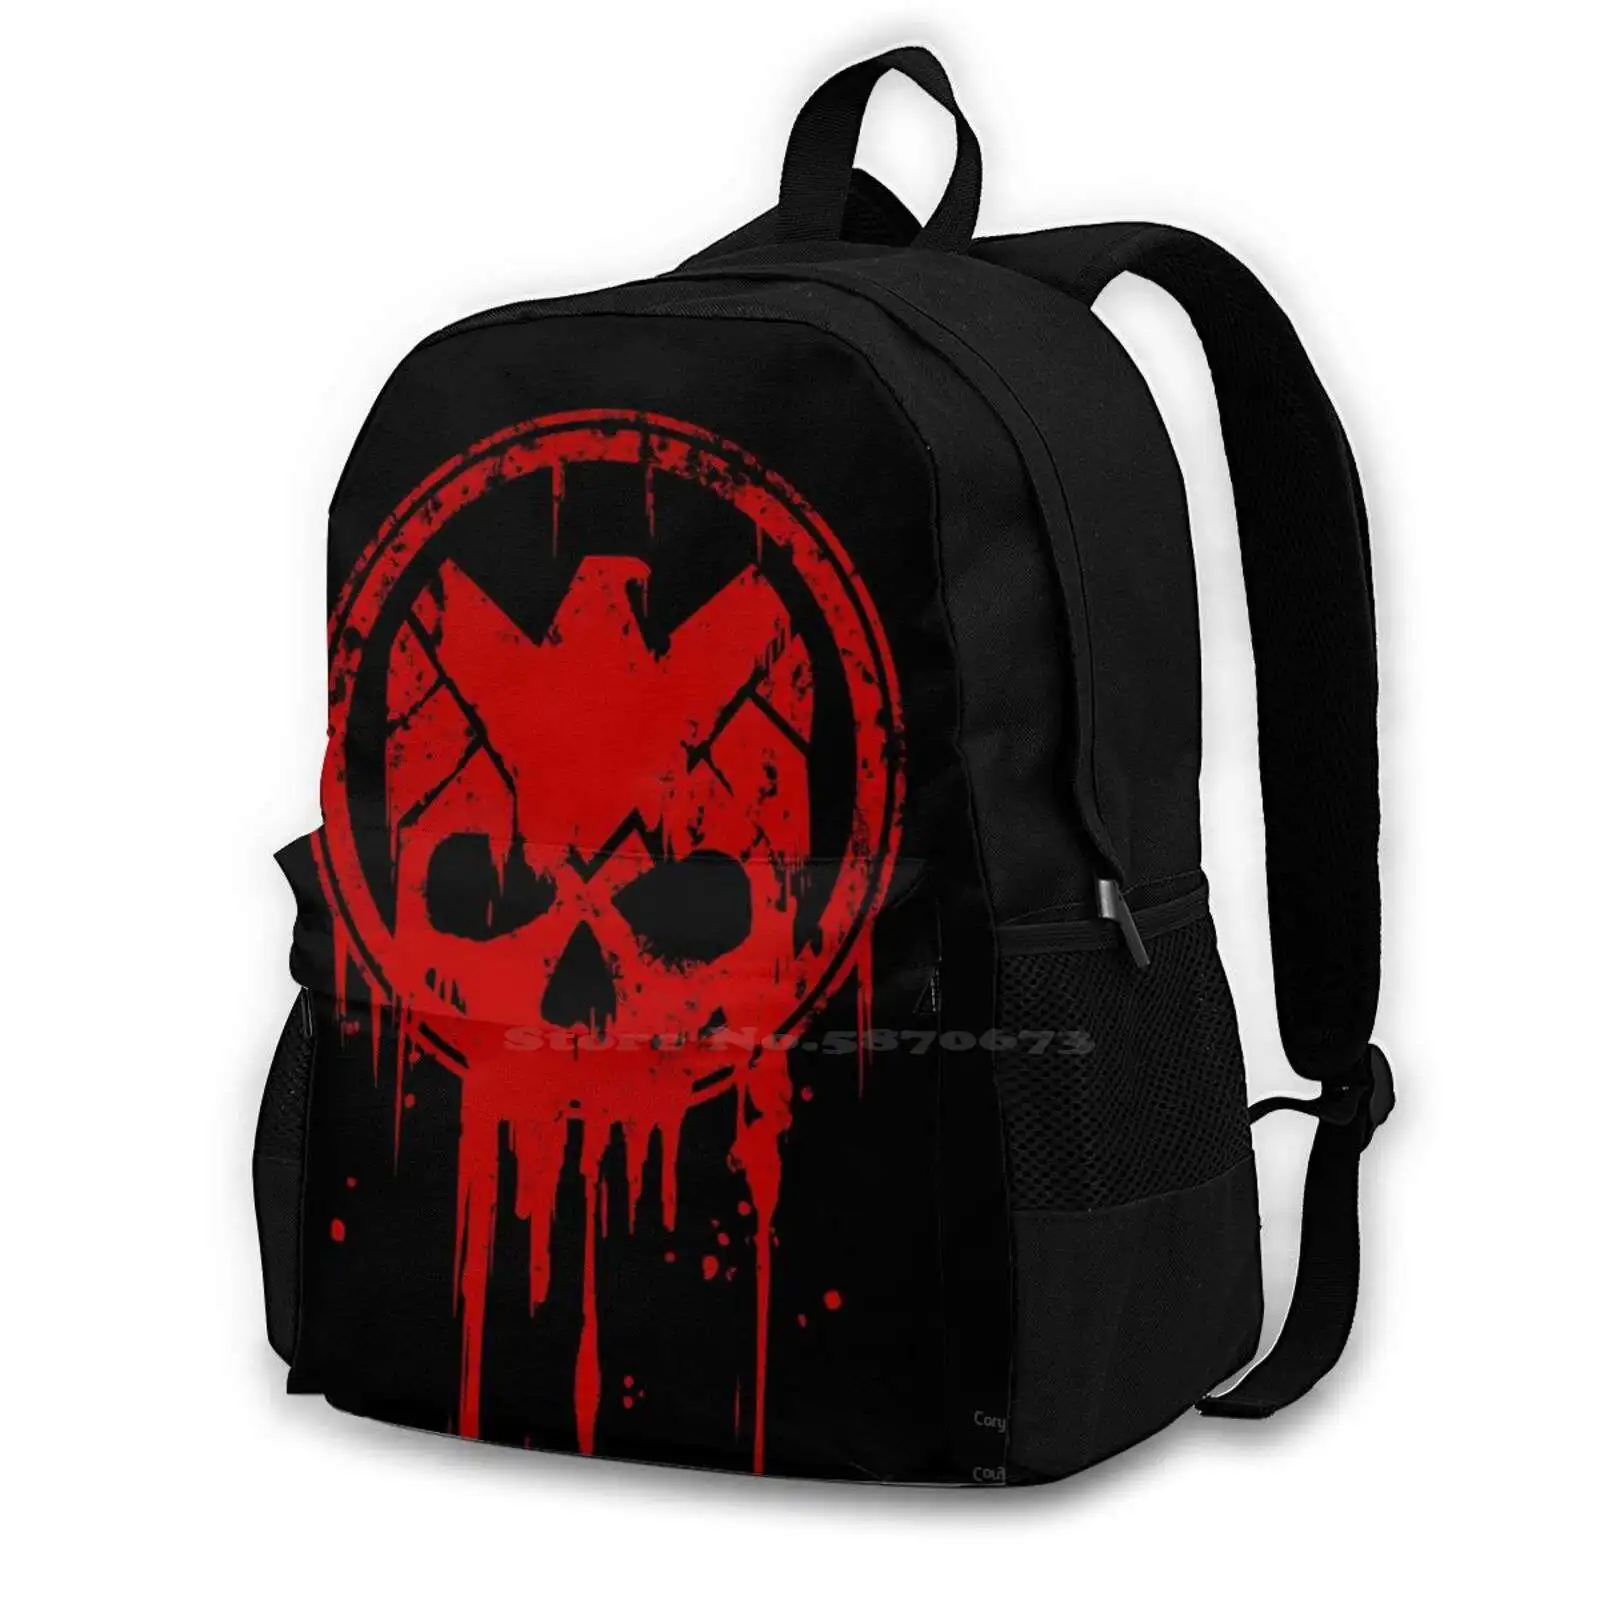 

Compromised ( Red ) New Arrivals Satchel Schoolbag Bags Backpack Shield Comic Film Movie